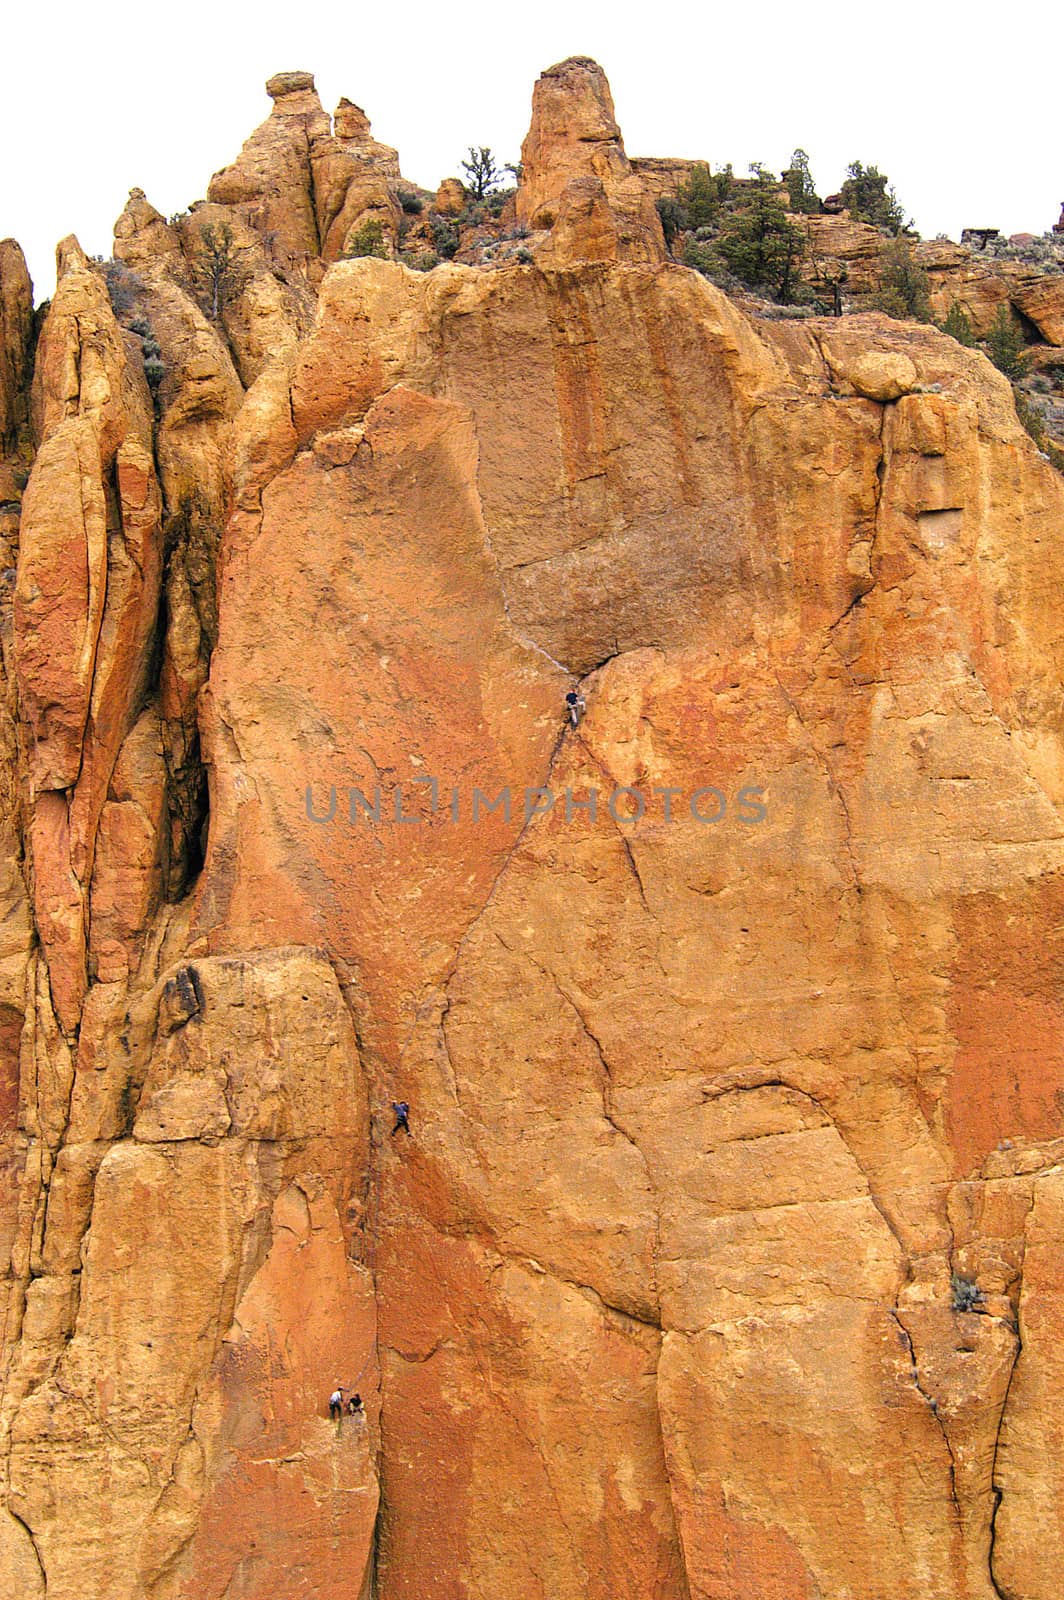 Climbers scale rocks at Smith Rocks State Park, Terrebon, OR